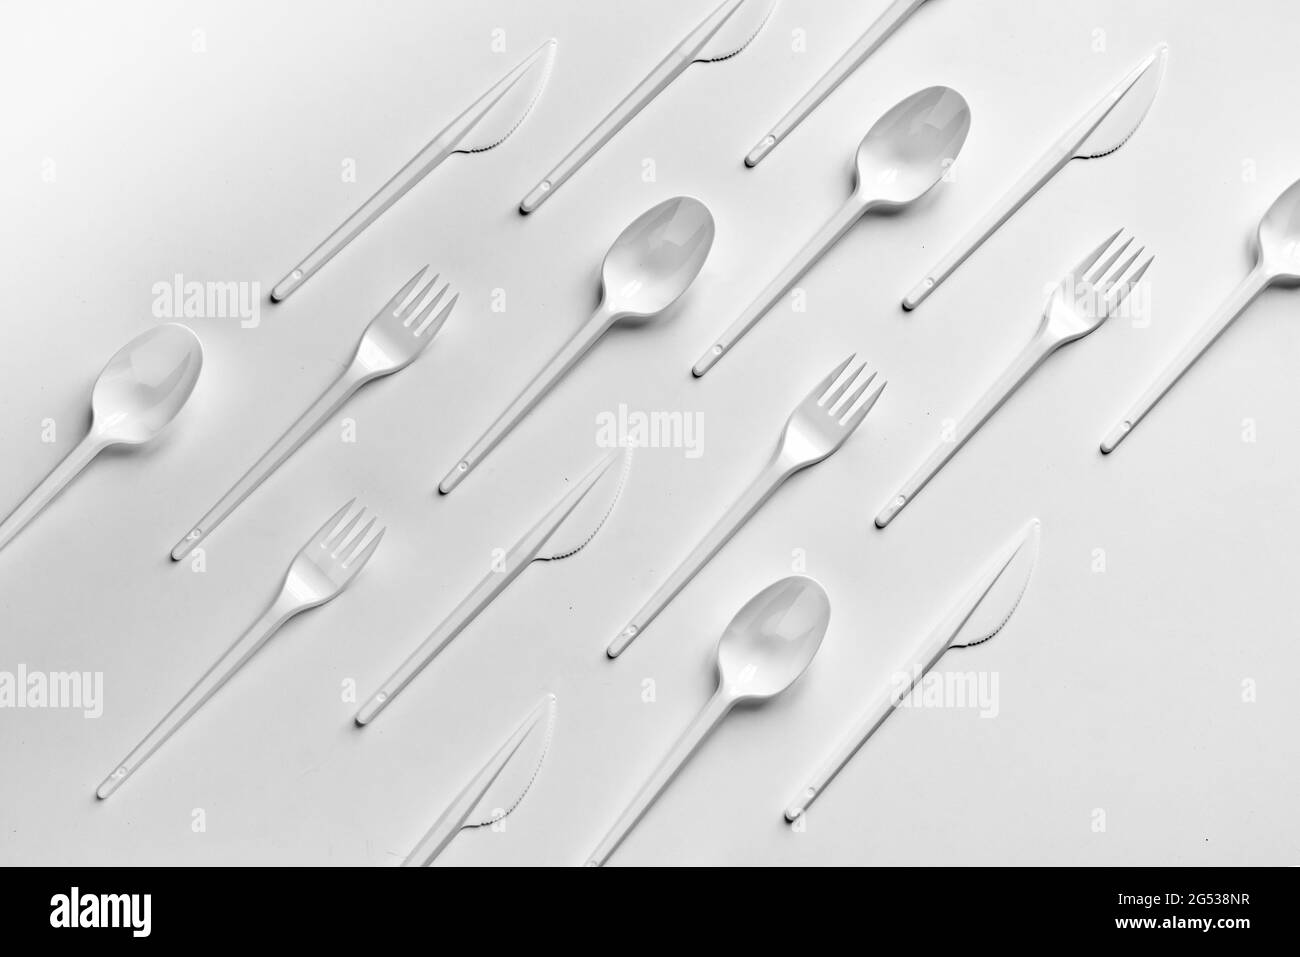 the creative flat lay of plastic forks spoons and knifes pattern Stock Photo